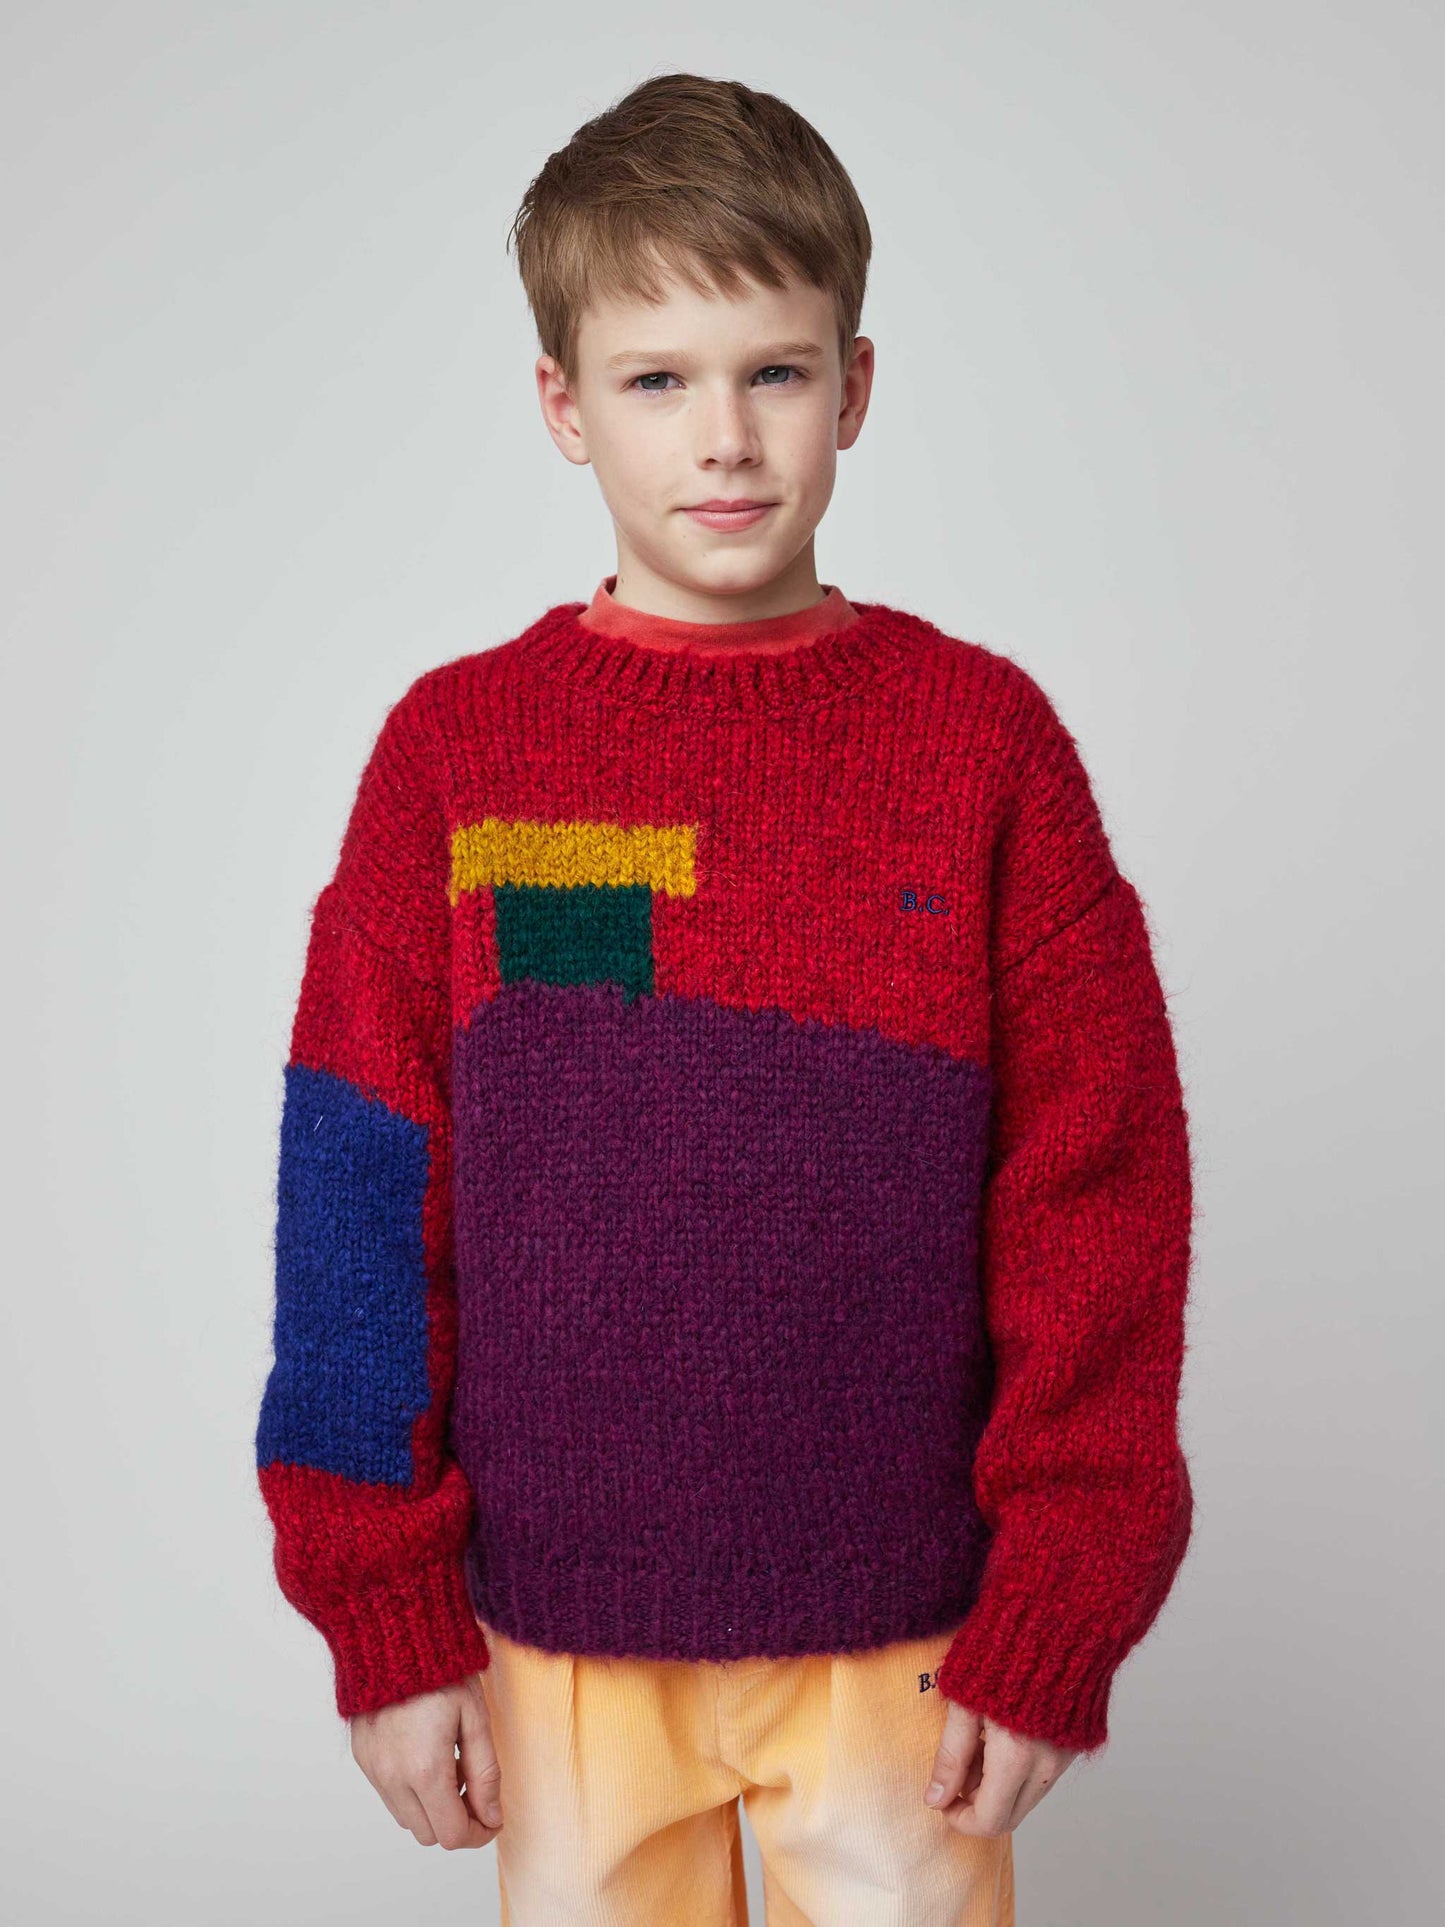 Top Of The Hill chunky knit intarsia jumper